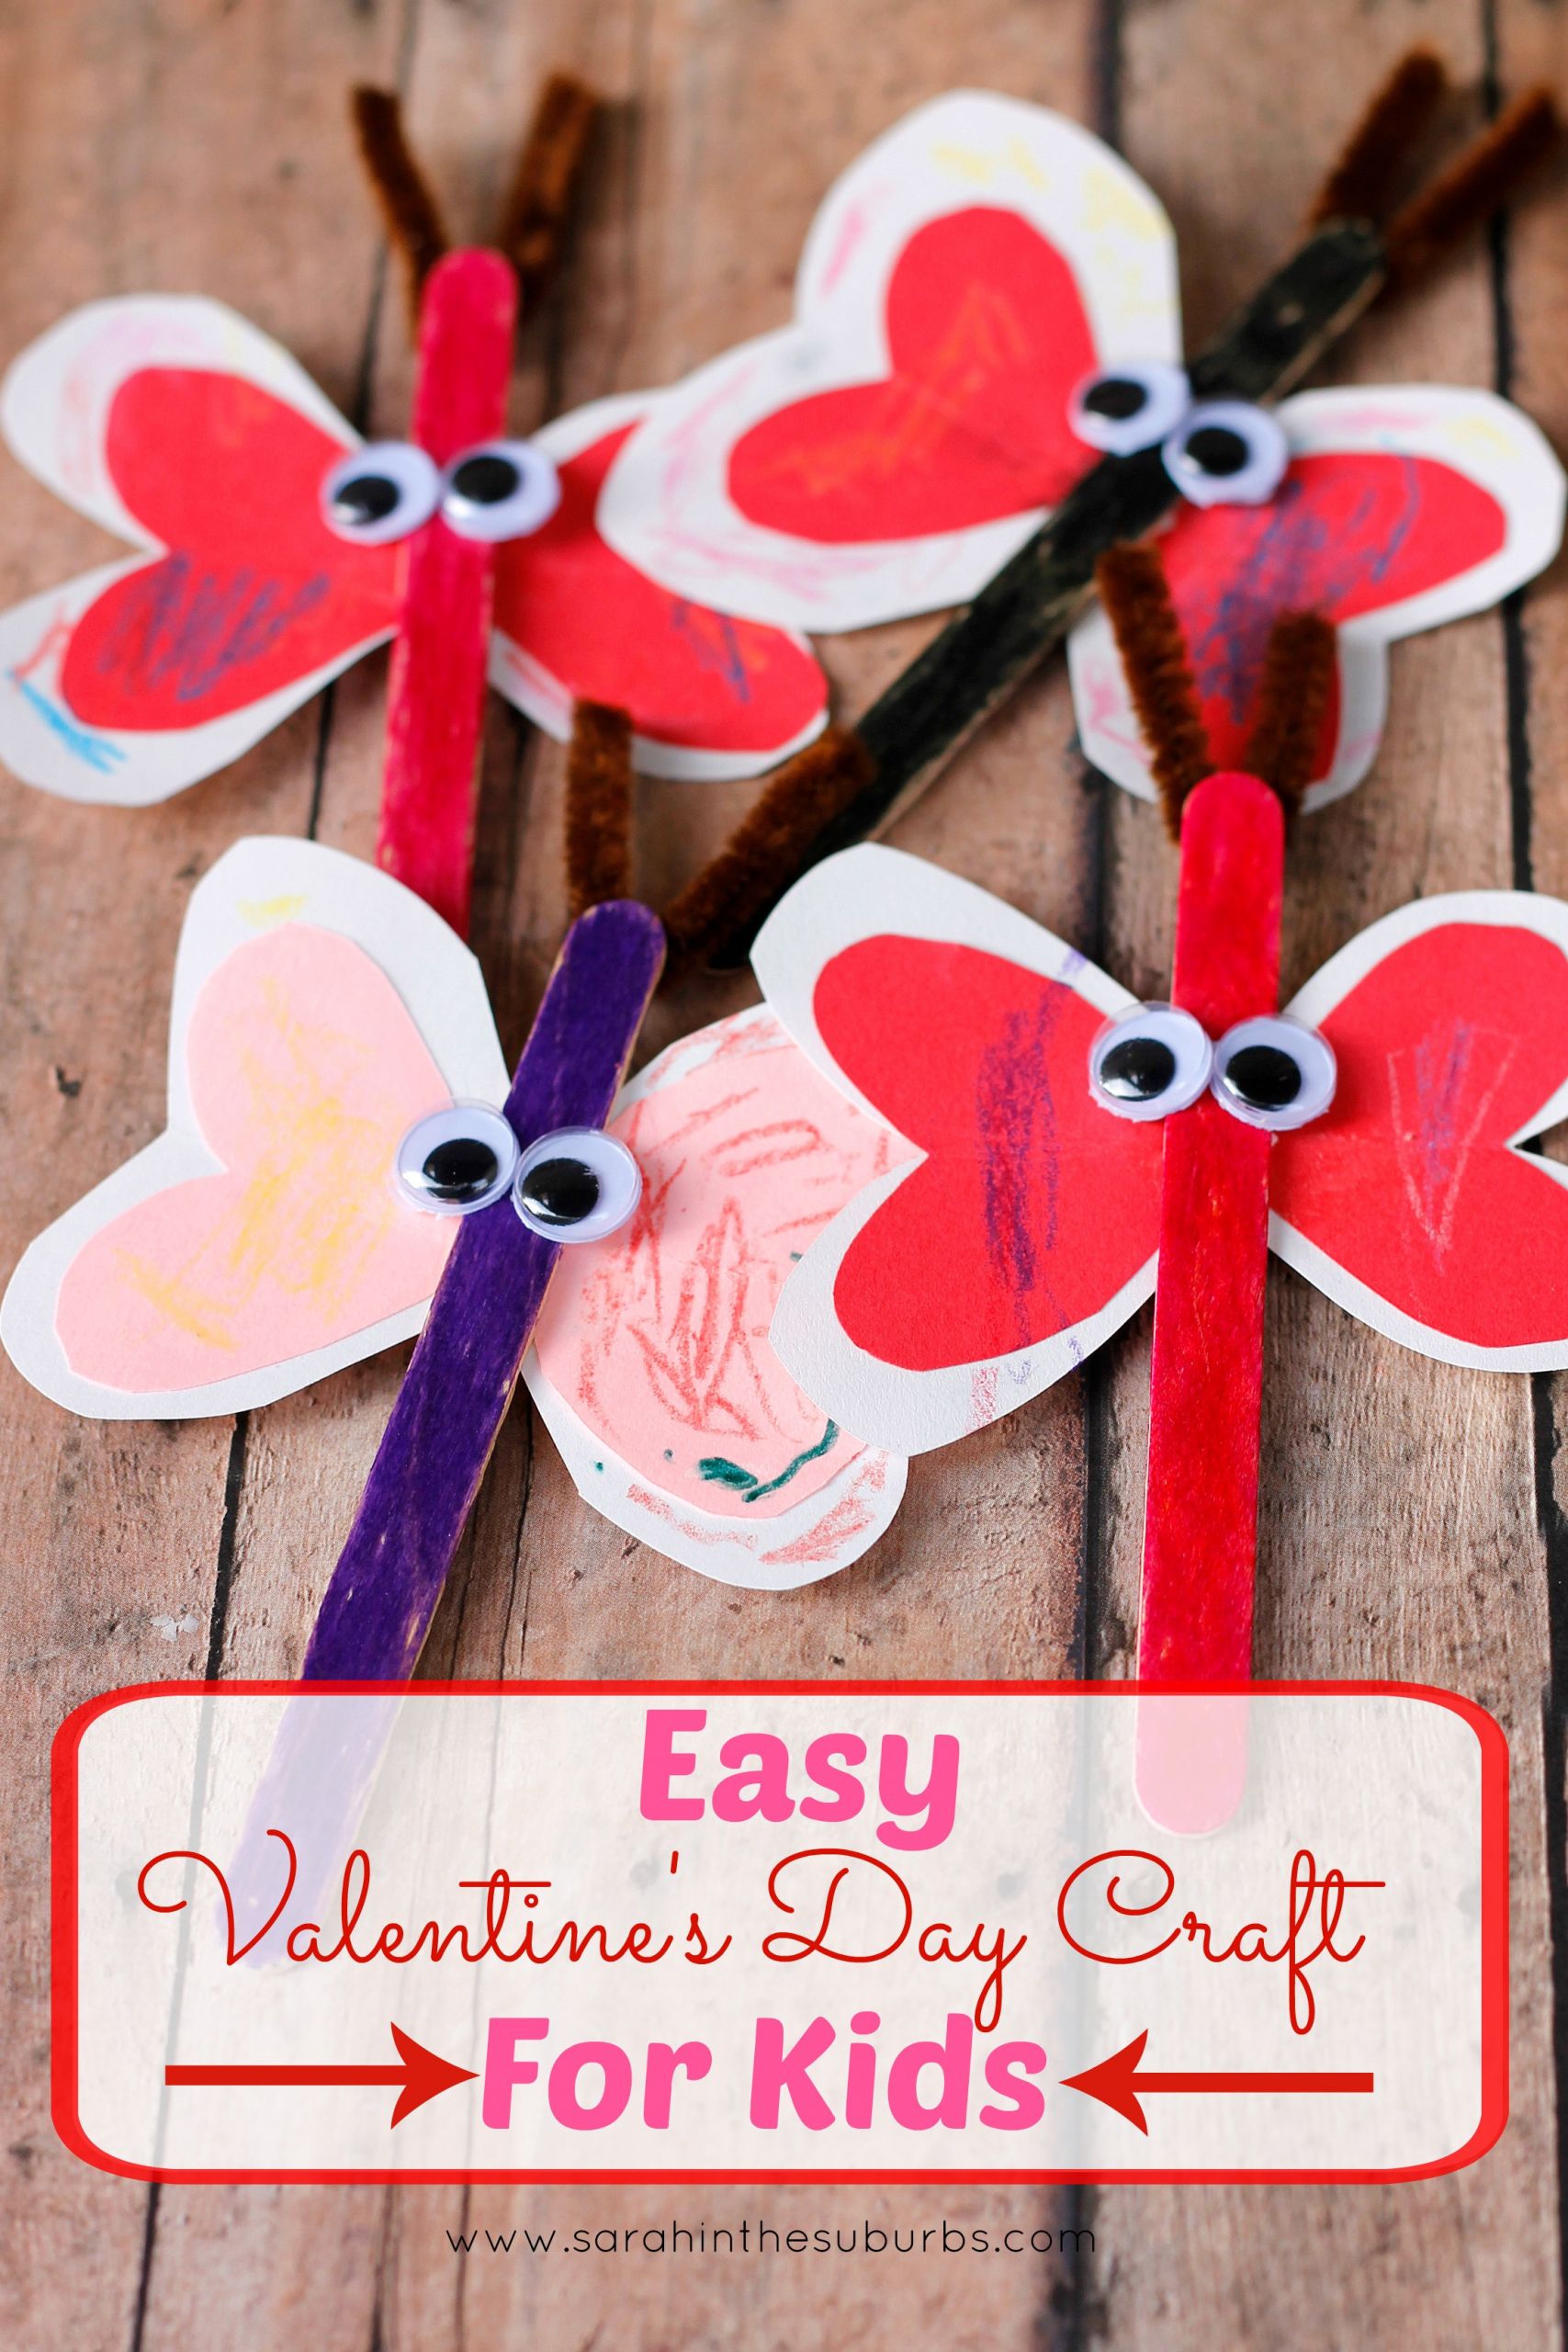 Valentine Craft Ideas Toddler
 Love Bug Valentine s Day Craft for Kids Sarah in the Suburbs